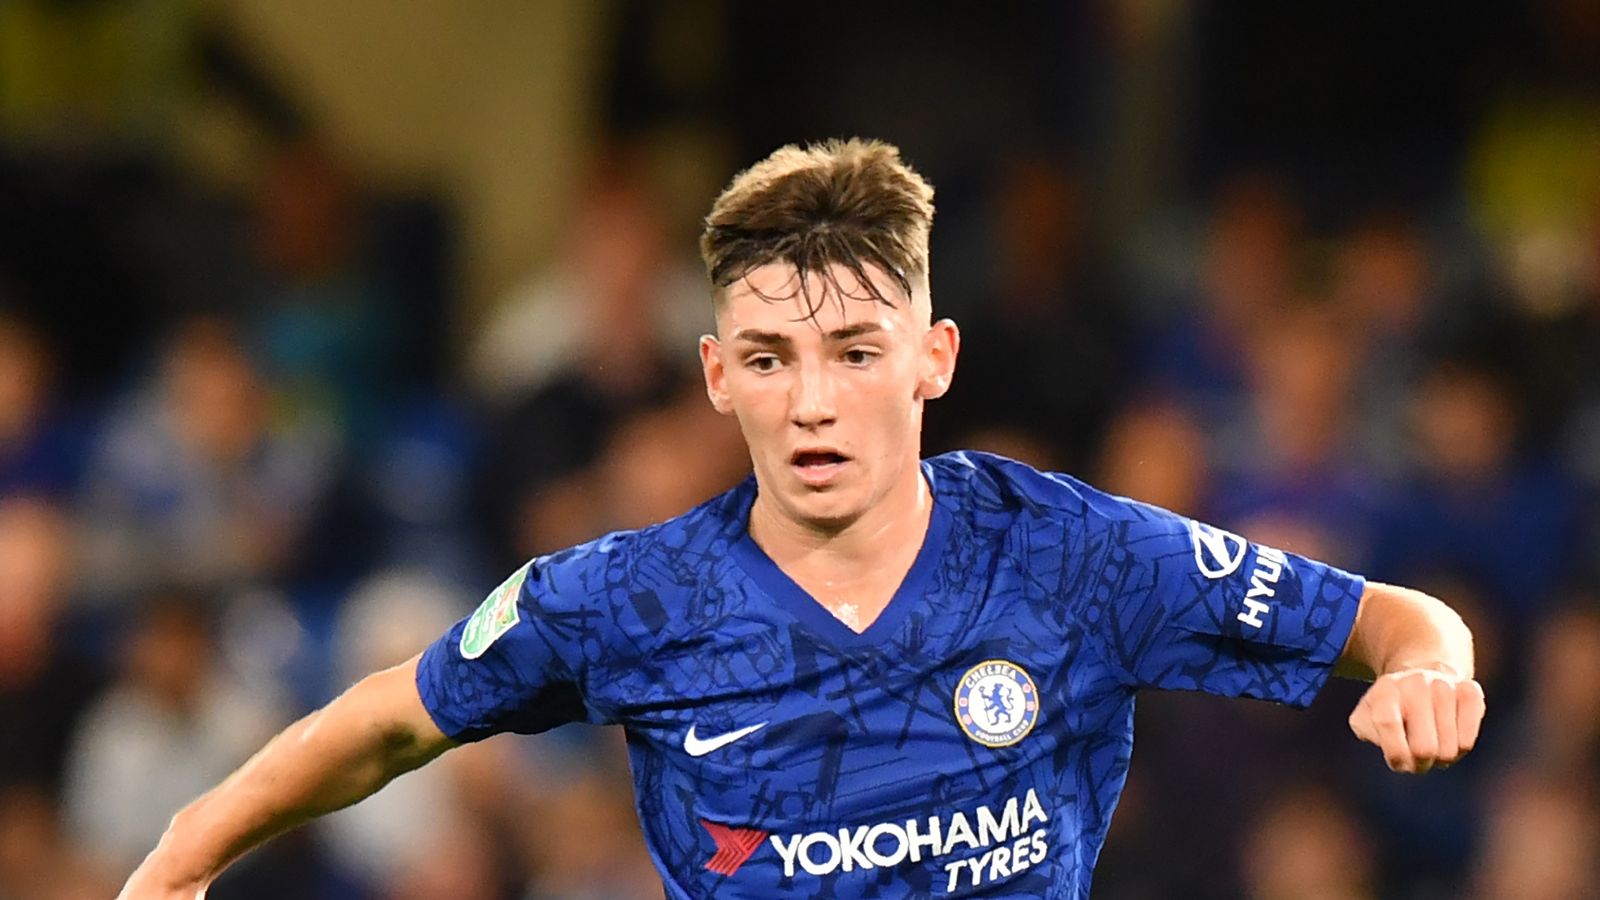 Billy Gilmour's emotional intelligence can see him succeed at Chelsea, says Scot Gemmill